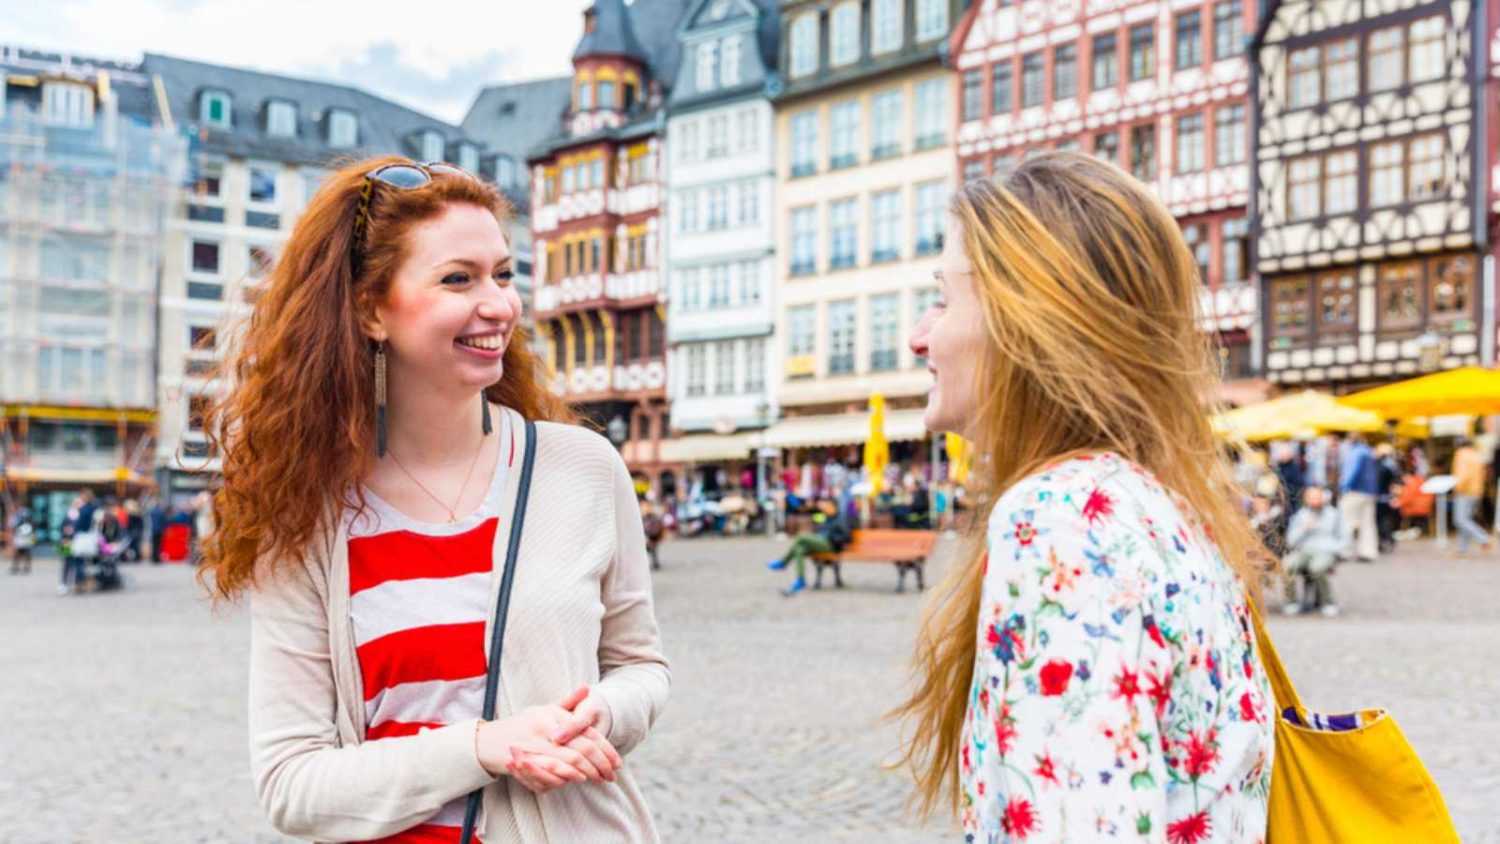 Two beautiful women meeting and having fun in Frankfurt main square. Girls smiling and chatting with houses and people on background. Friendship and travel concepts.